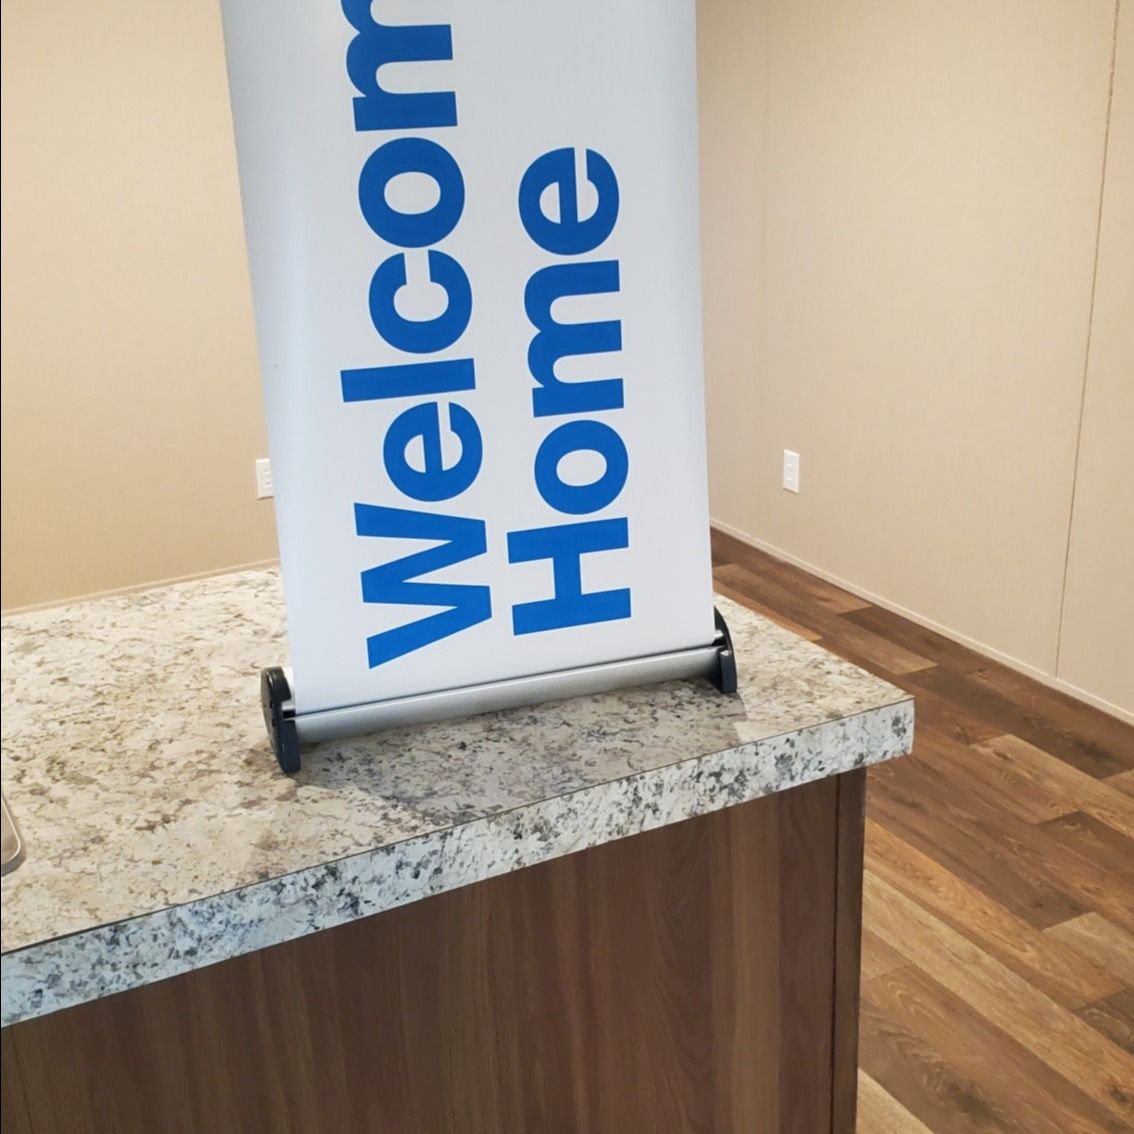 NOAH G. welcome home image